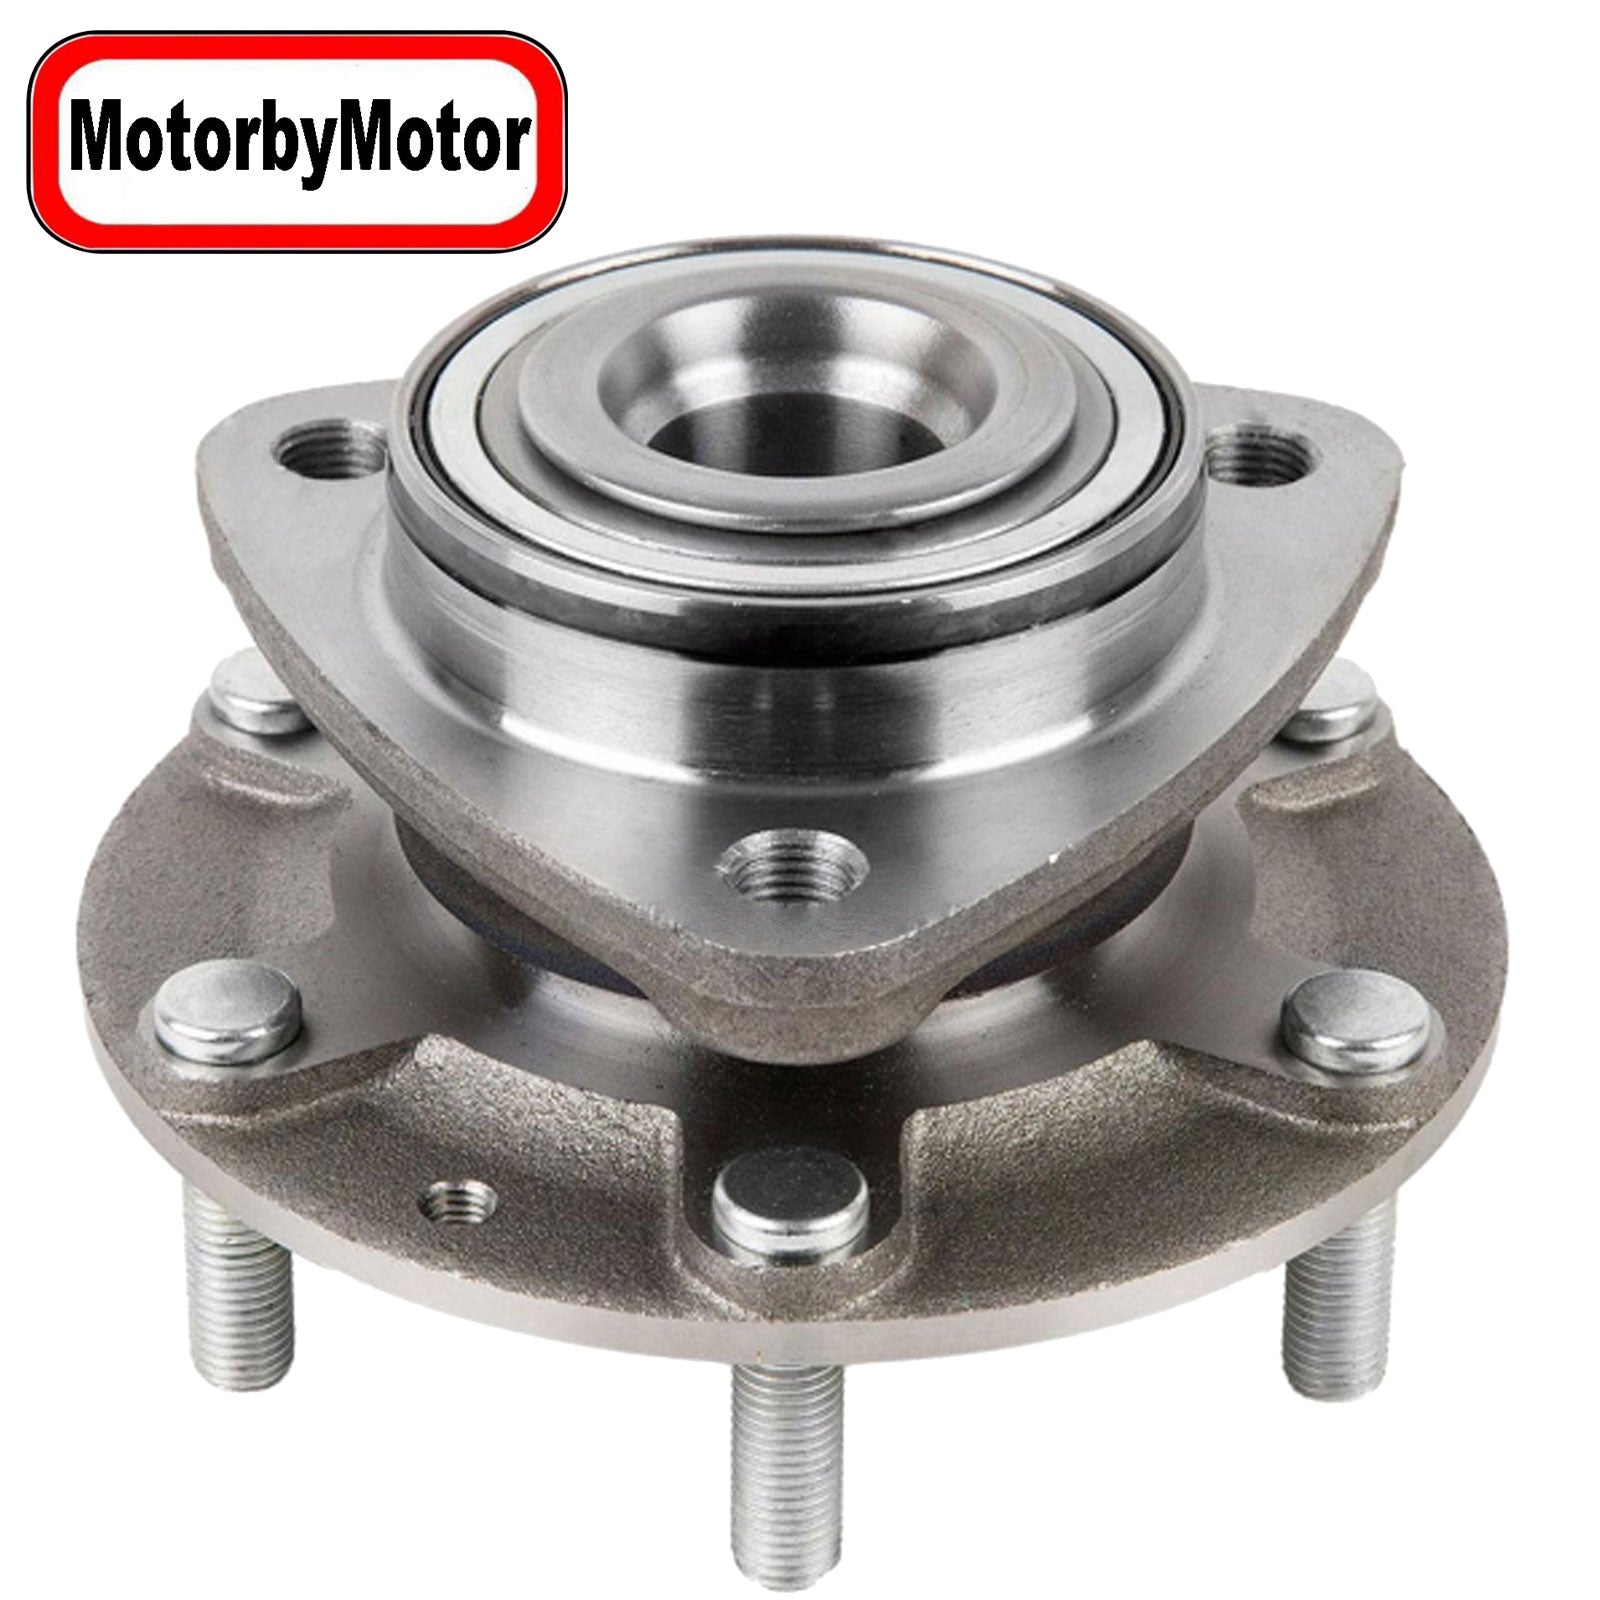 MotorbyMotor 515090 Front Wheel Bearing and Hub Assembly with 6 Lugs Fits for 2007-2009 Hyundai Entourage, 2006-2014 Kia Sedona Low-Runout OE Directly Replacement Hub Bearing MotorbyMotor